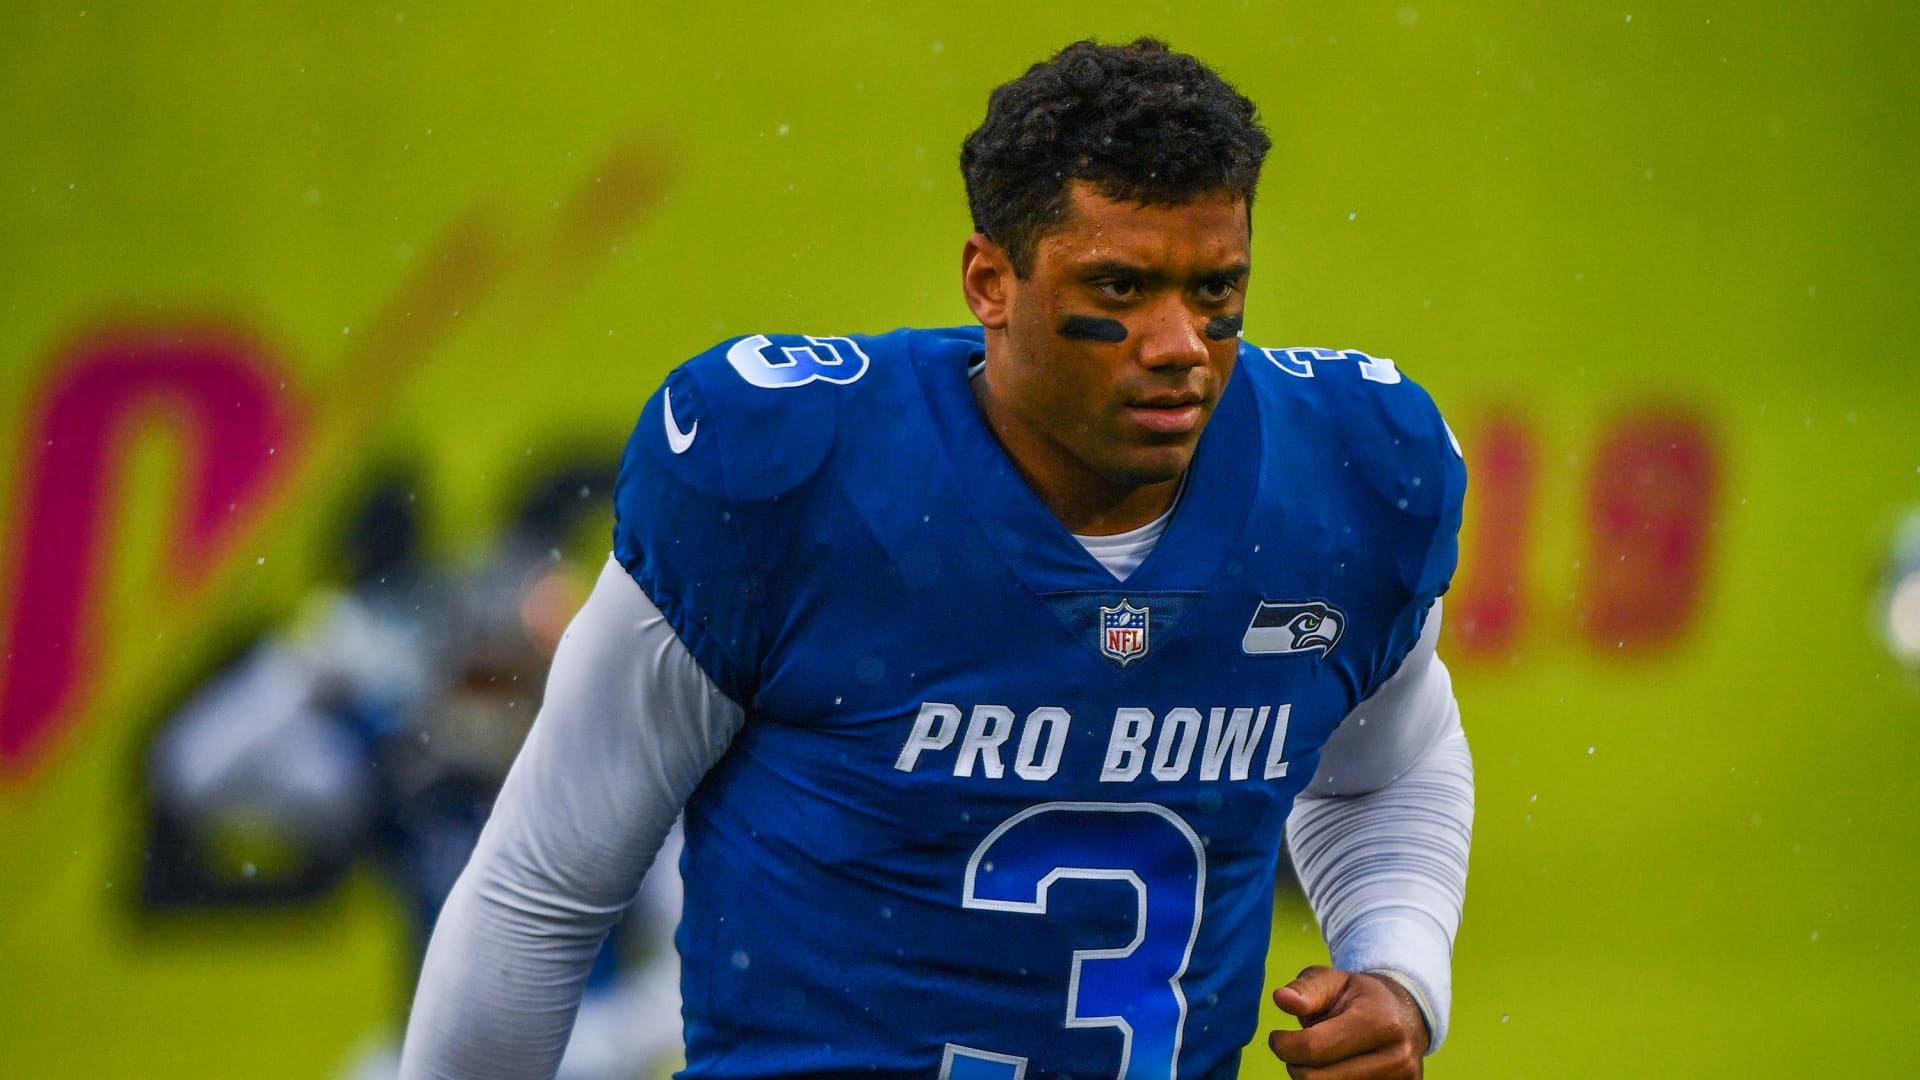 Russell Wilson #3 of the Seattle Seahawks at the 2019 NFL Pro Bowl